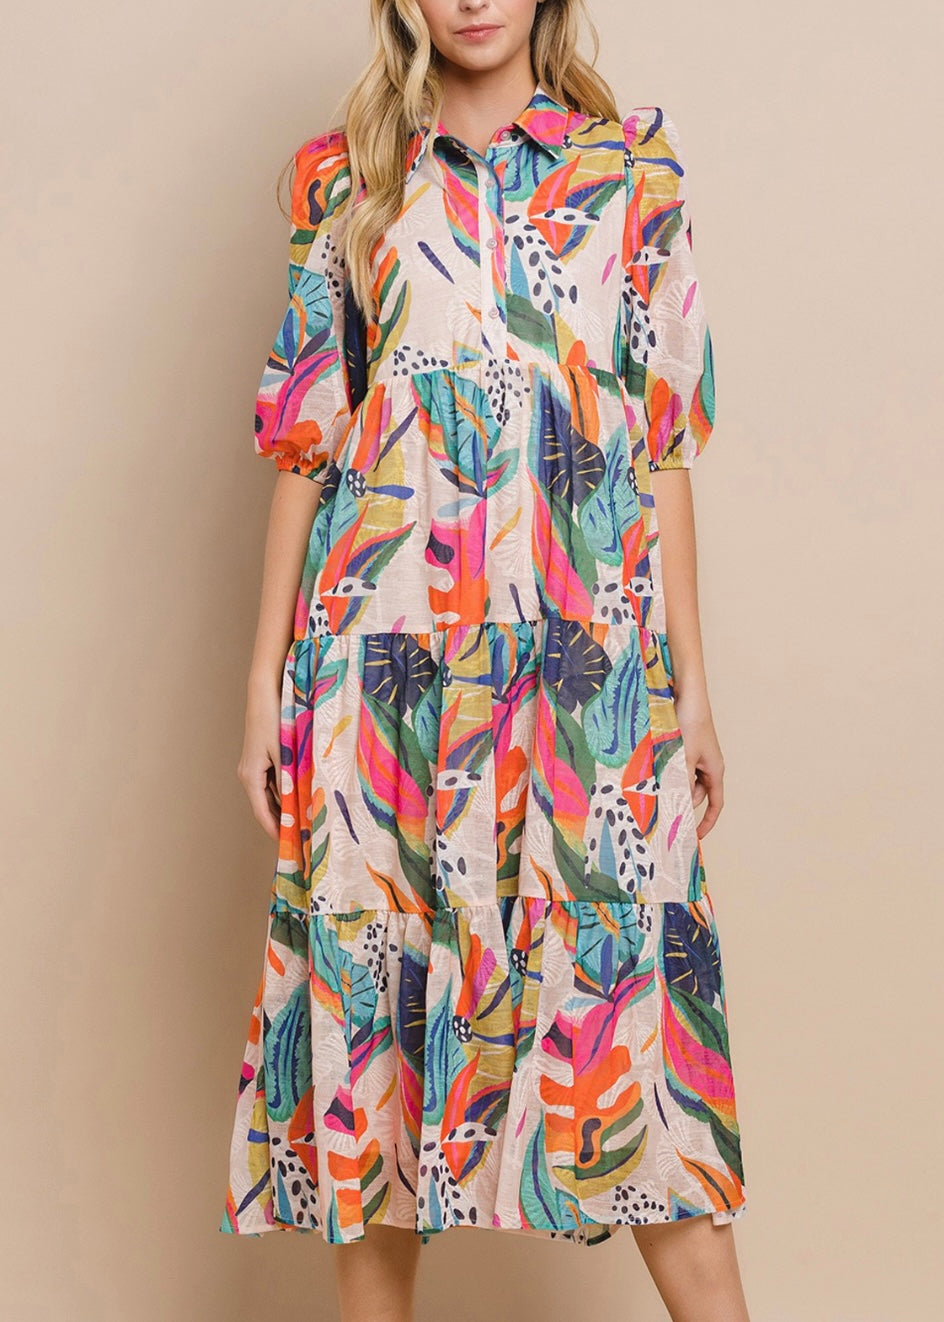 Printed Button Up Dress